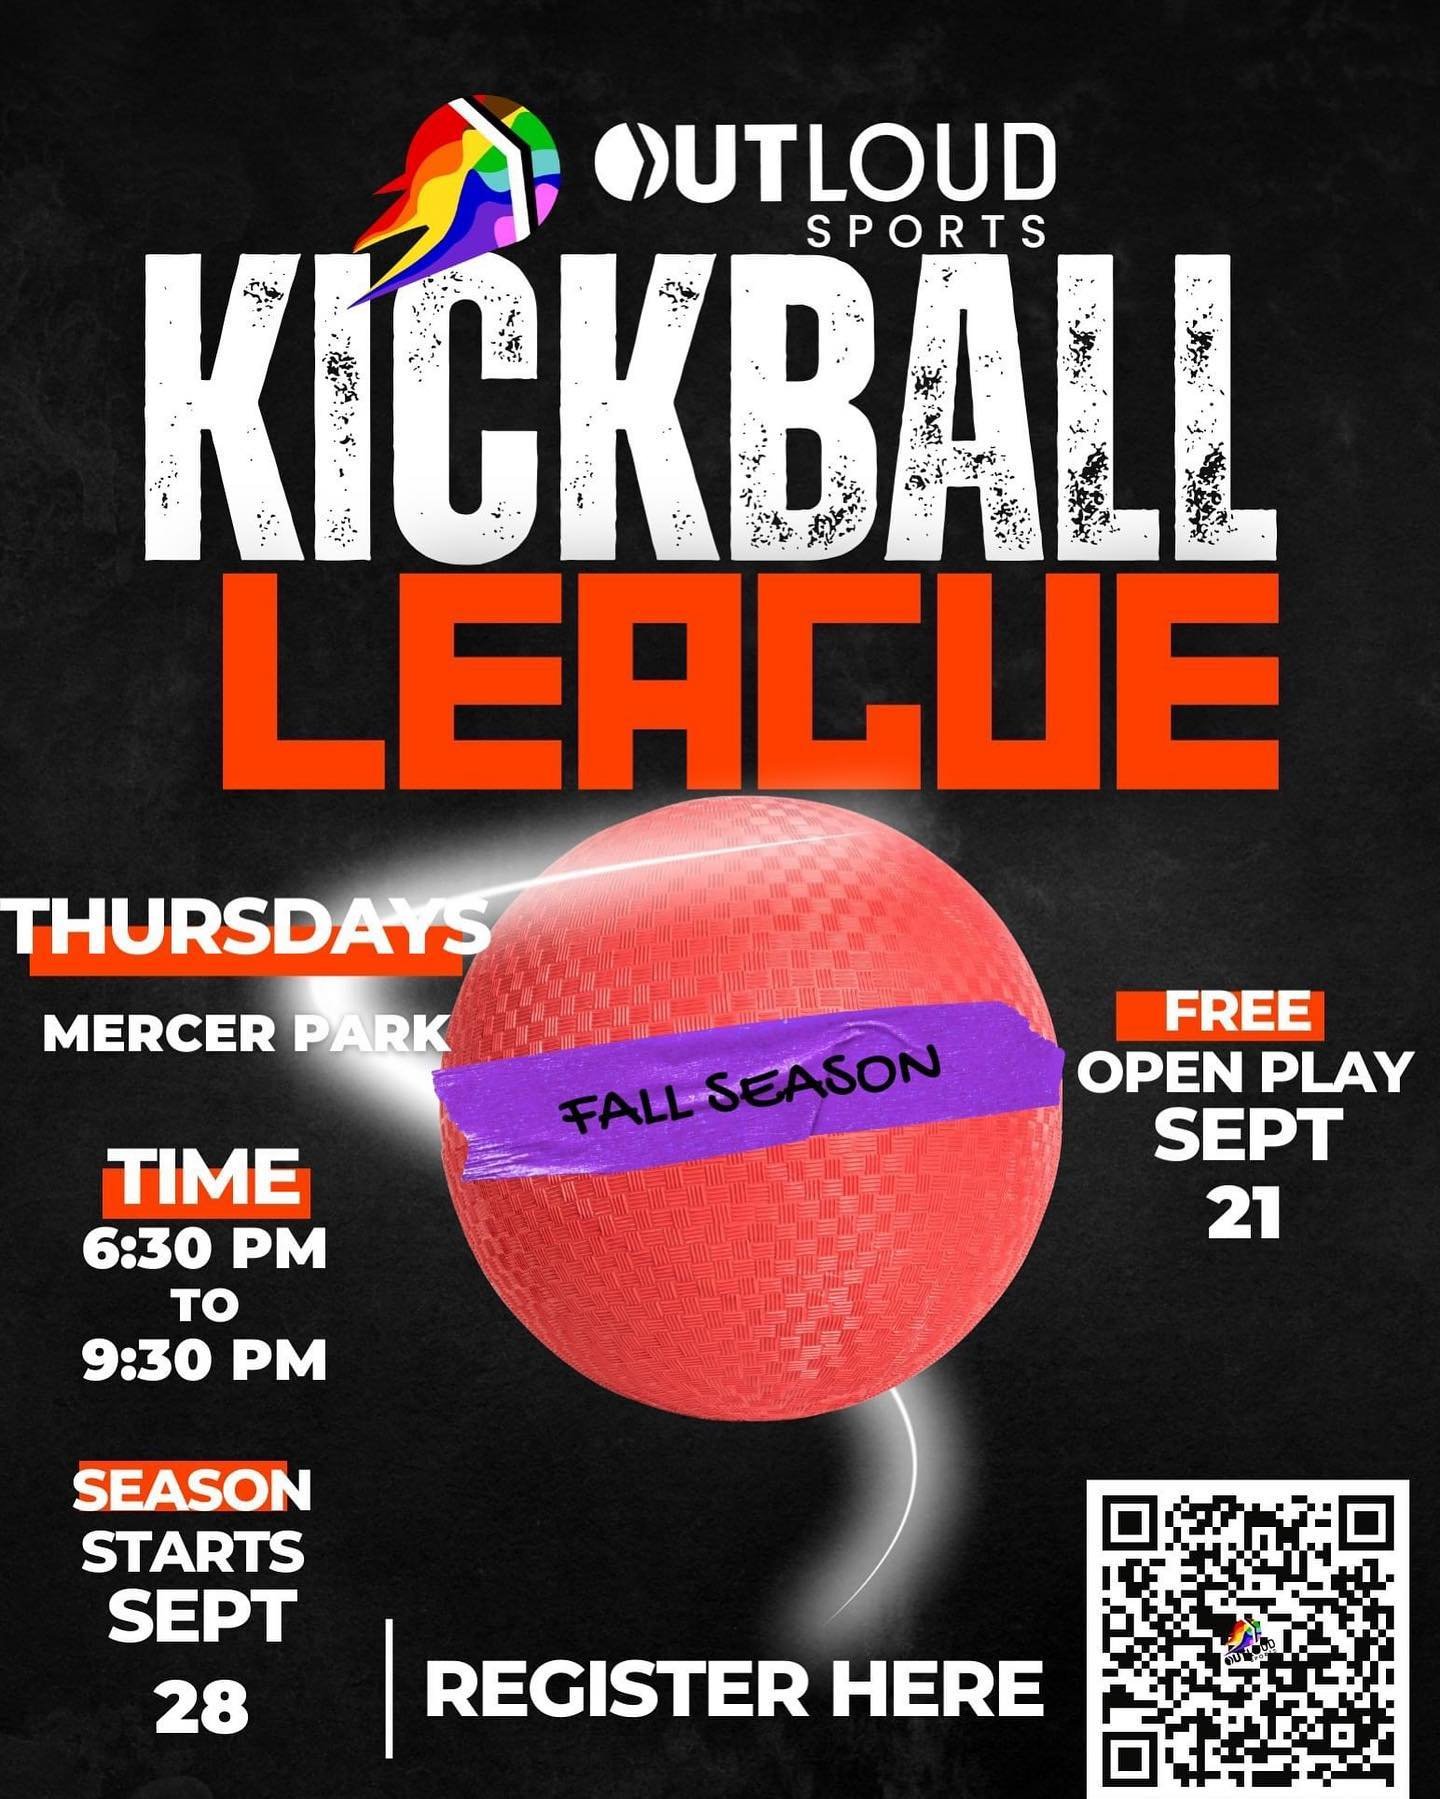 Whether you are registered yet or not, please join us for a FREE OPEN PLAY this THURSDAY at Mercer Park at 6:30pm. 
Get to know the rules, meet new people, and get ready for the upcoming season!

Registration will close early next week. Sign up now f